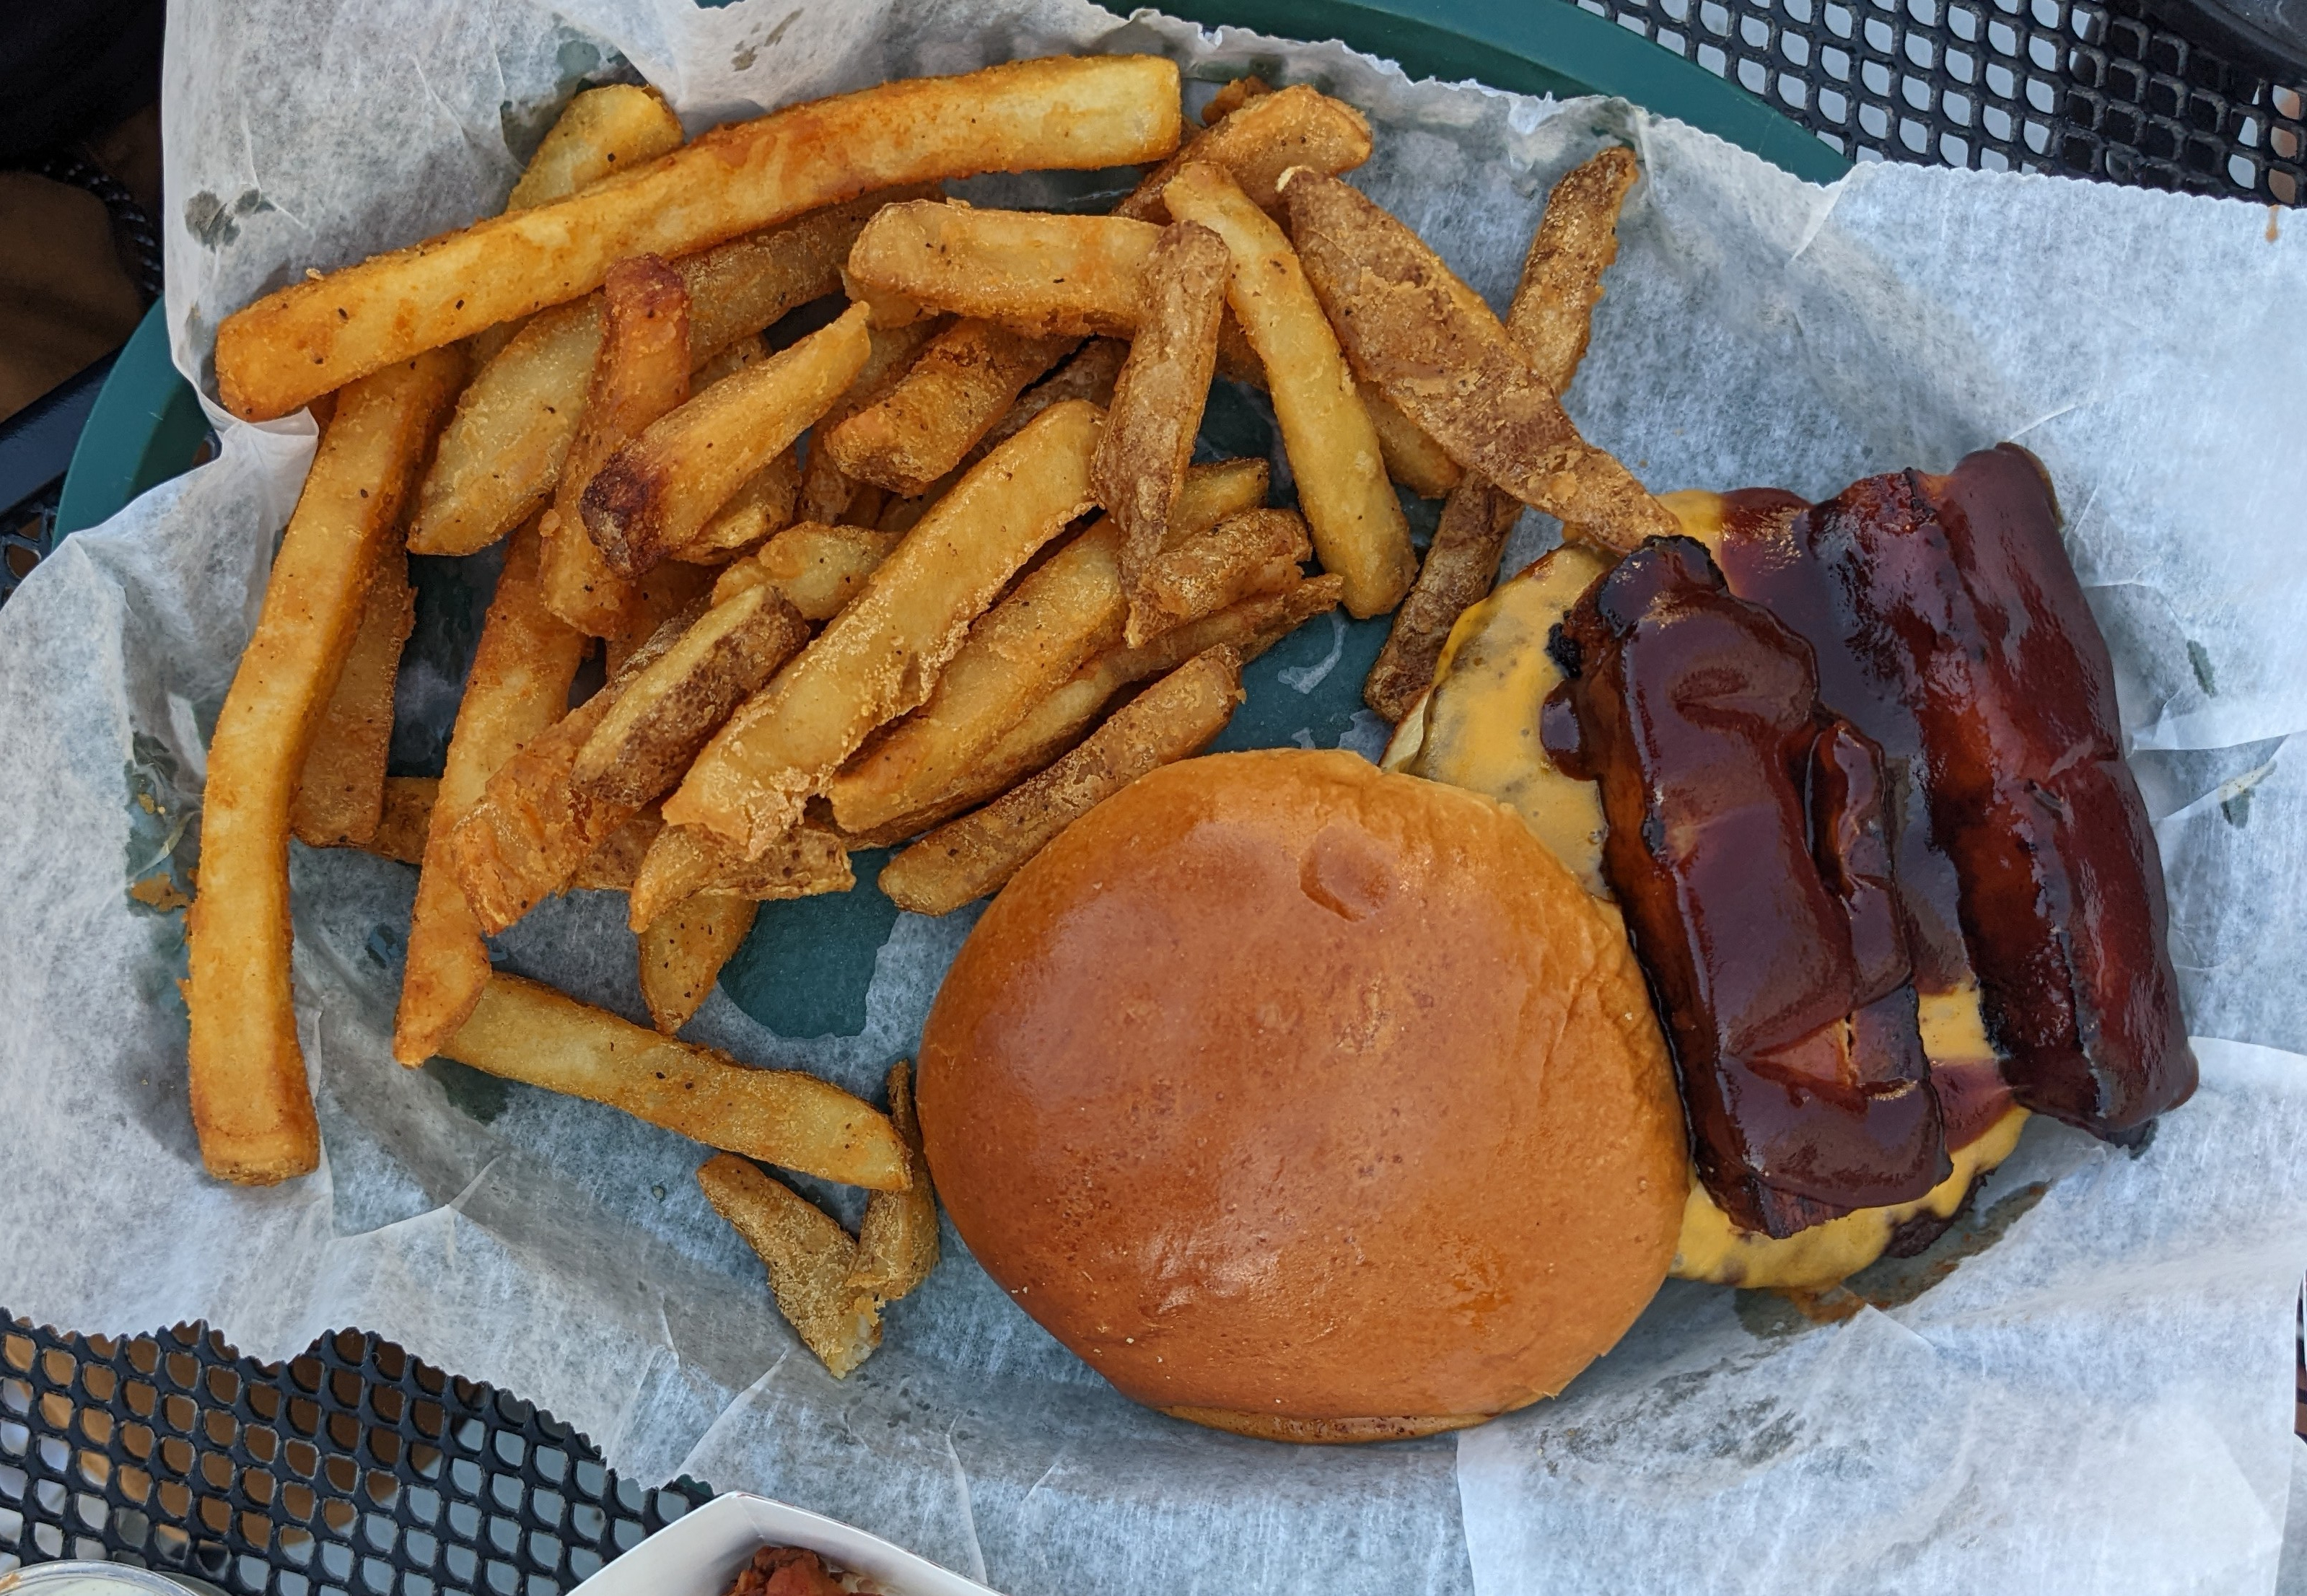 An overhead photo shows Bunny's porker with a side of fries on an outdoor table at Bunny's. Photo by Tayler Neumann.